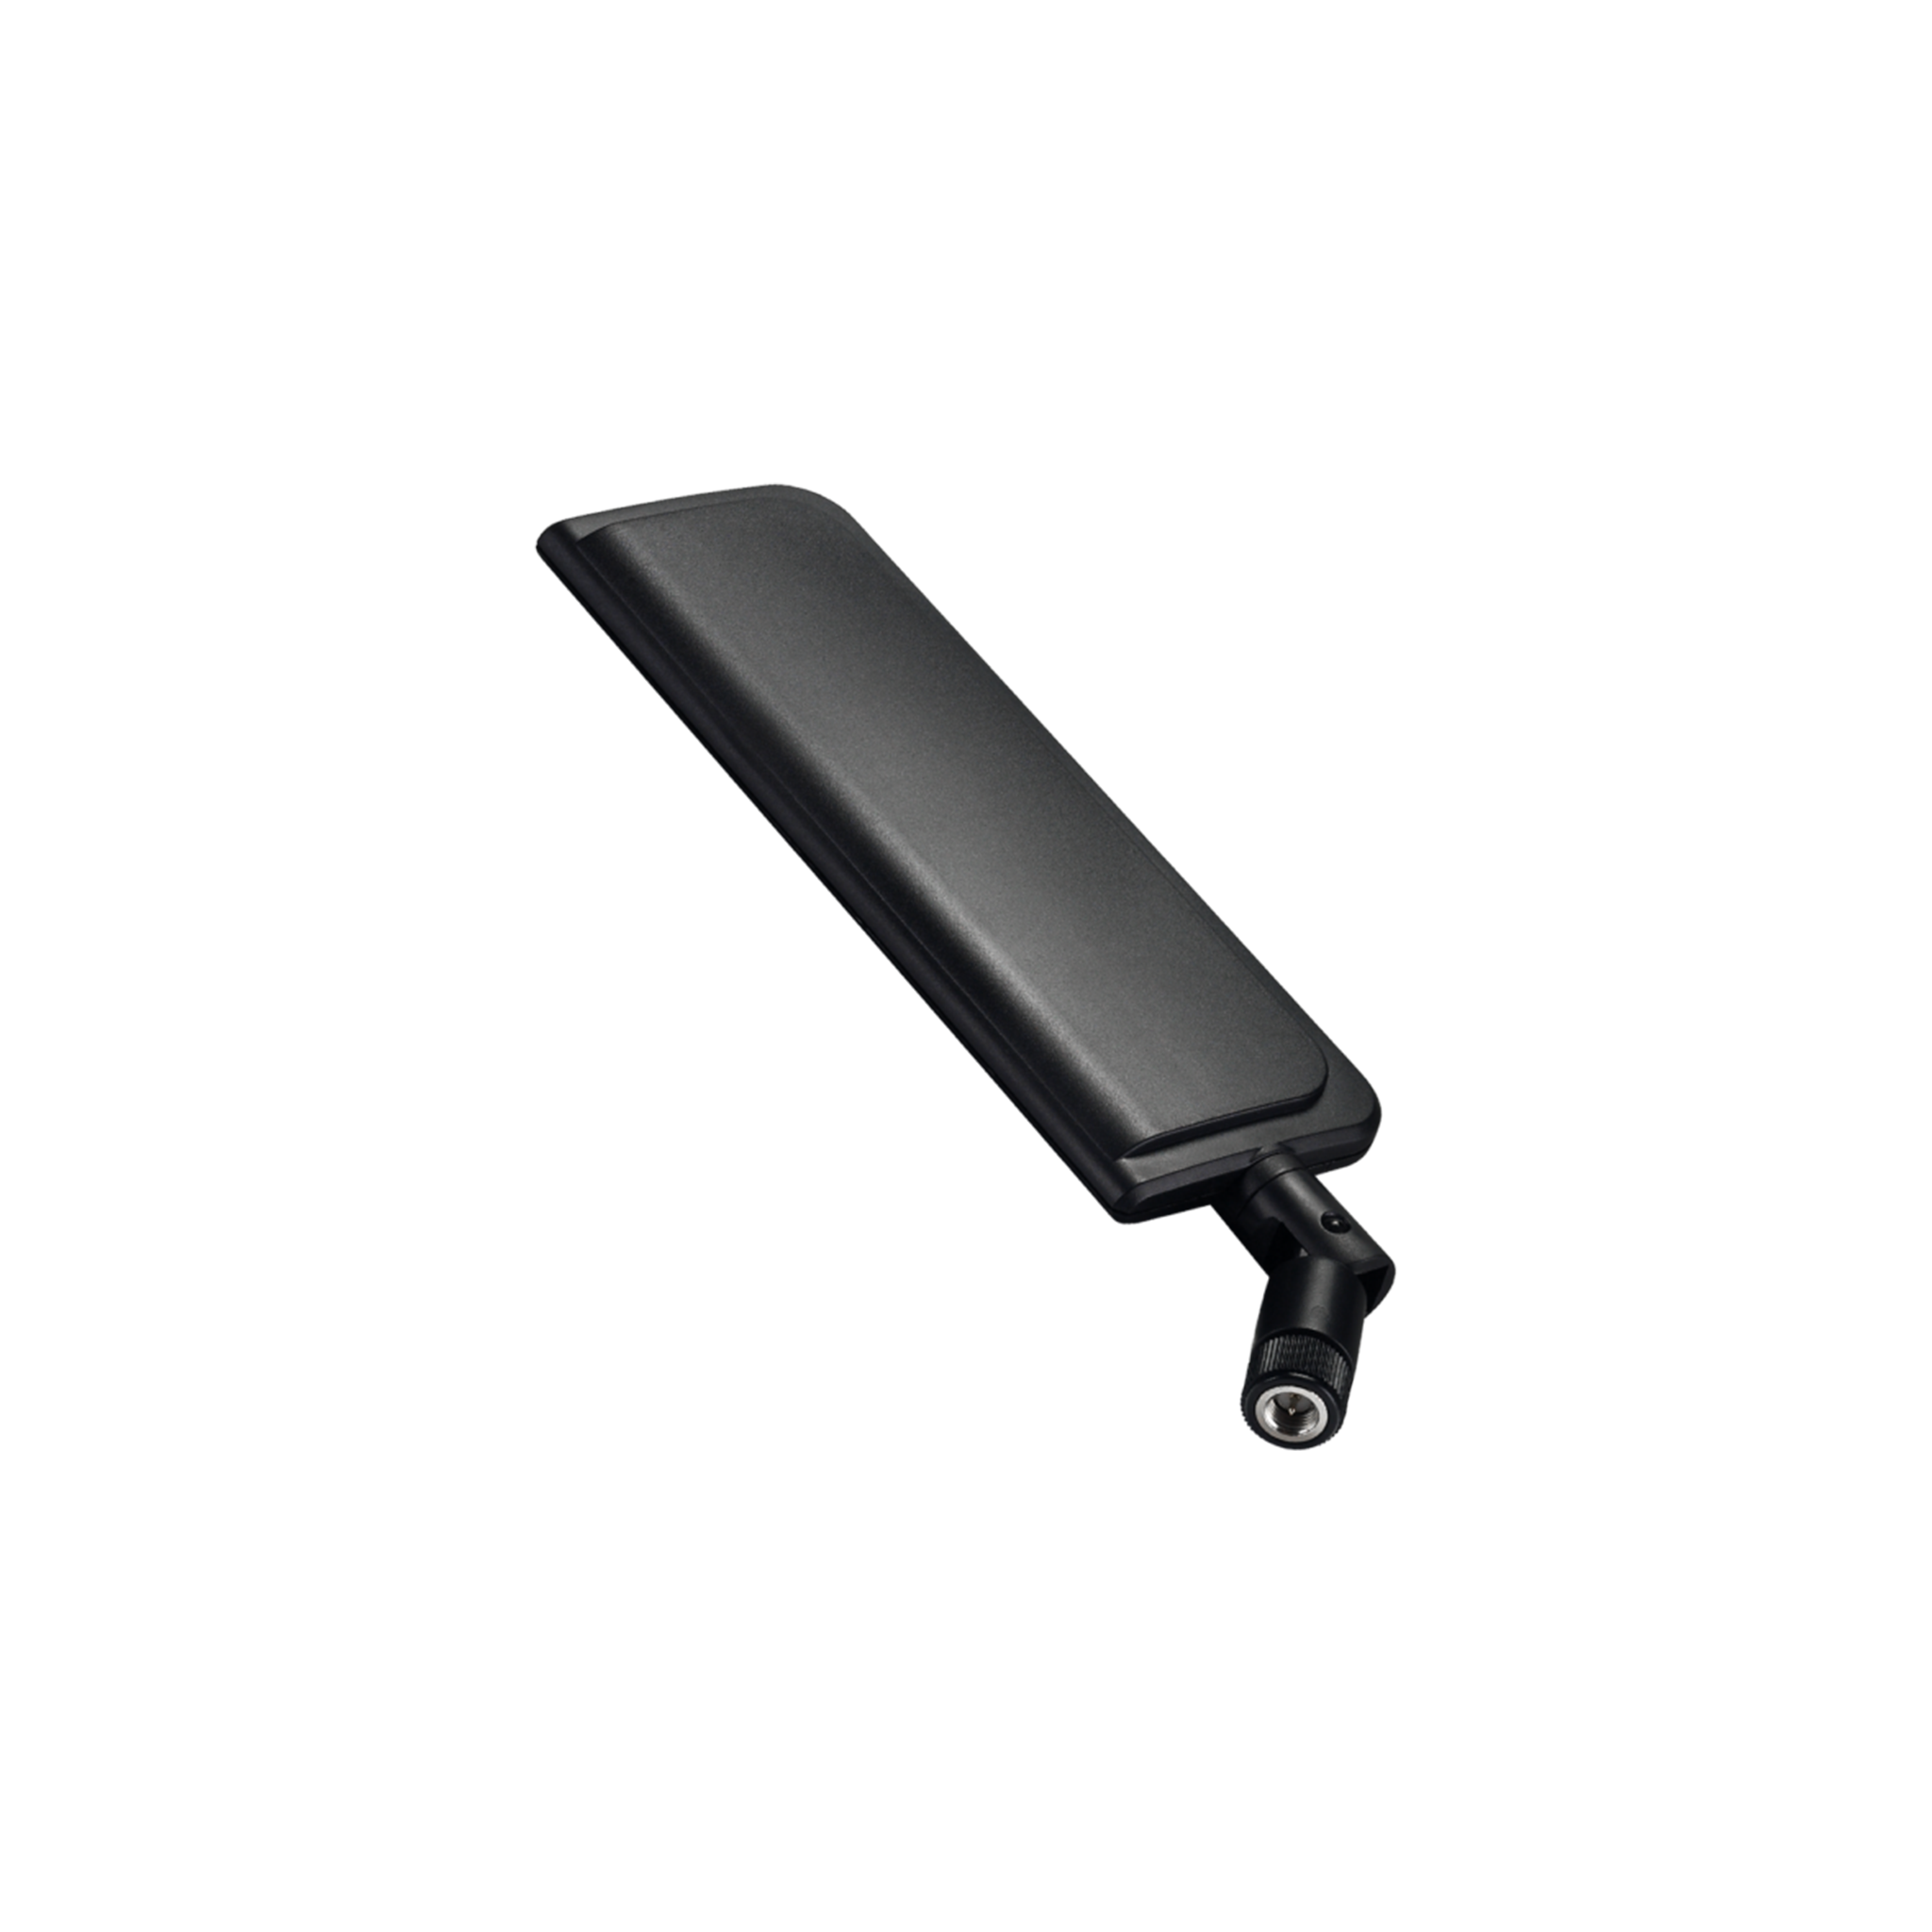 Inseego Antenna, Taoglas TG.30, LTE / GPS - SMA Connector